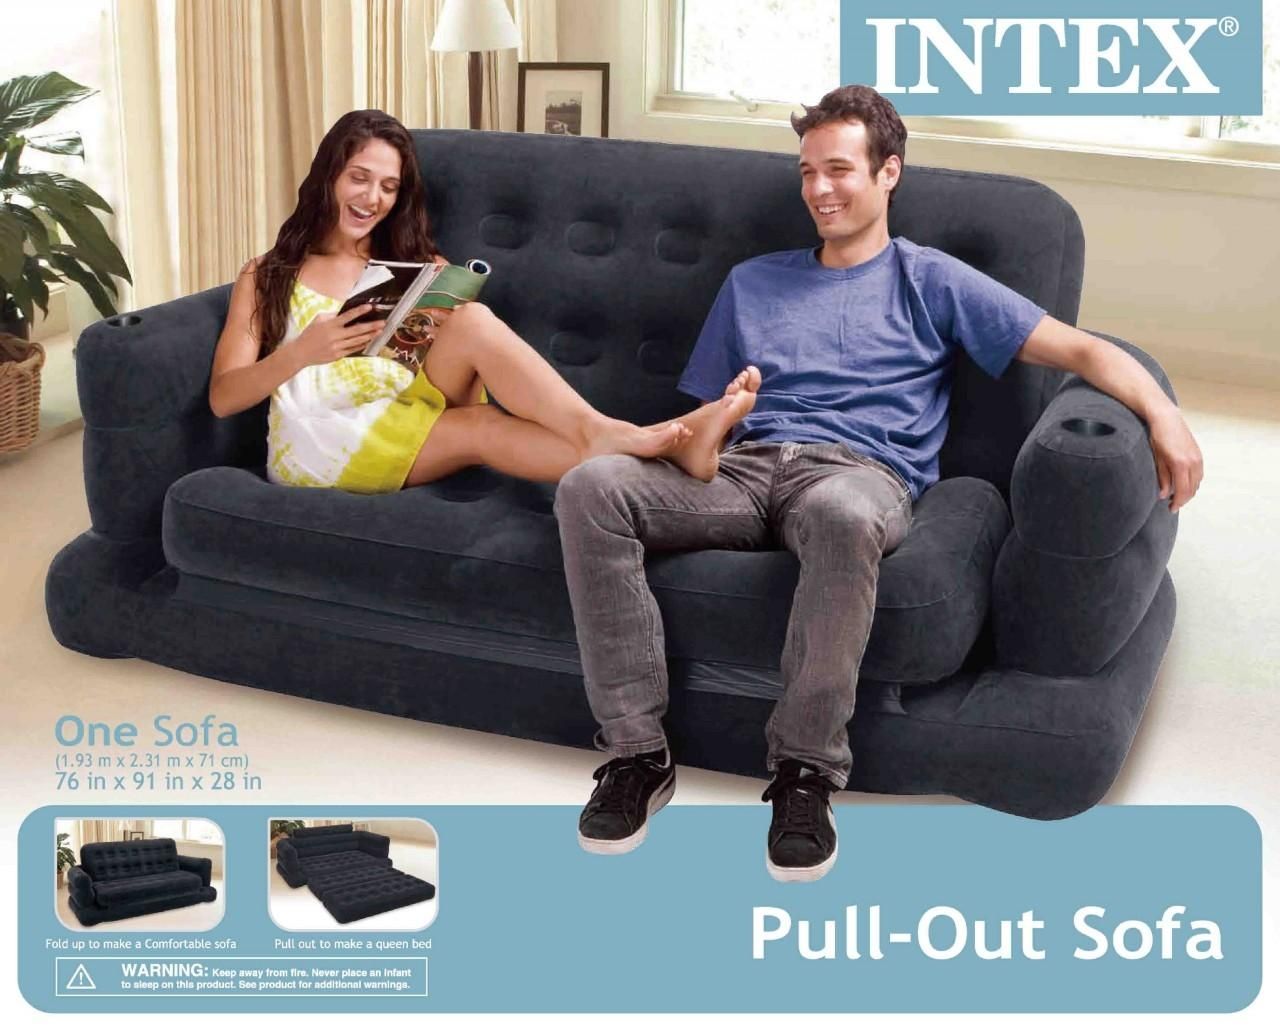 Intex Inflatable Pull Out Sofa And Queen Air Mattress Throughout Intex Inflatable Pull Out Sofas (View 1 of 20)